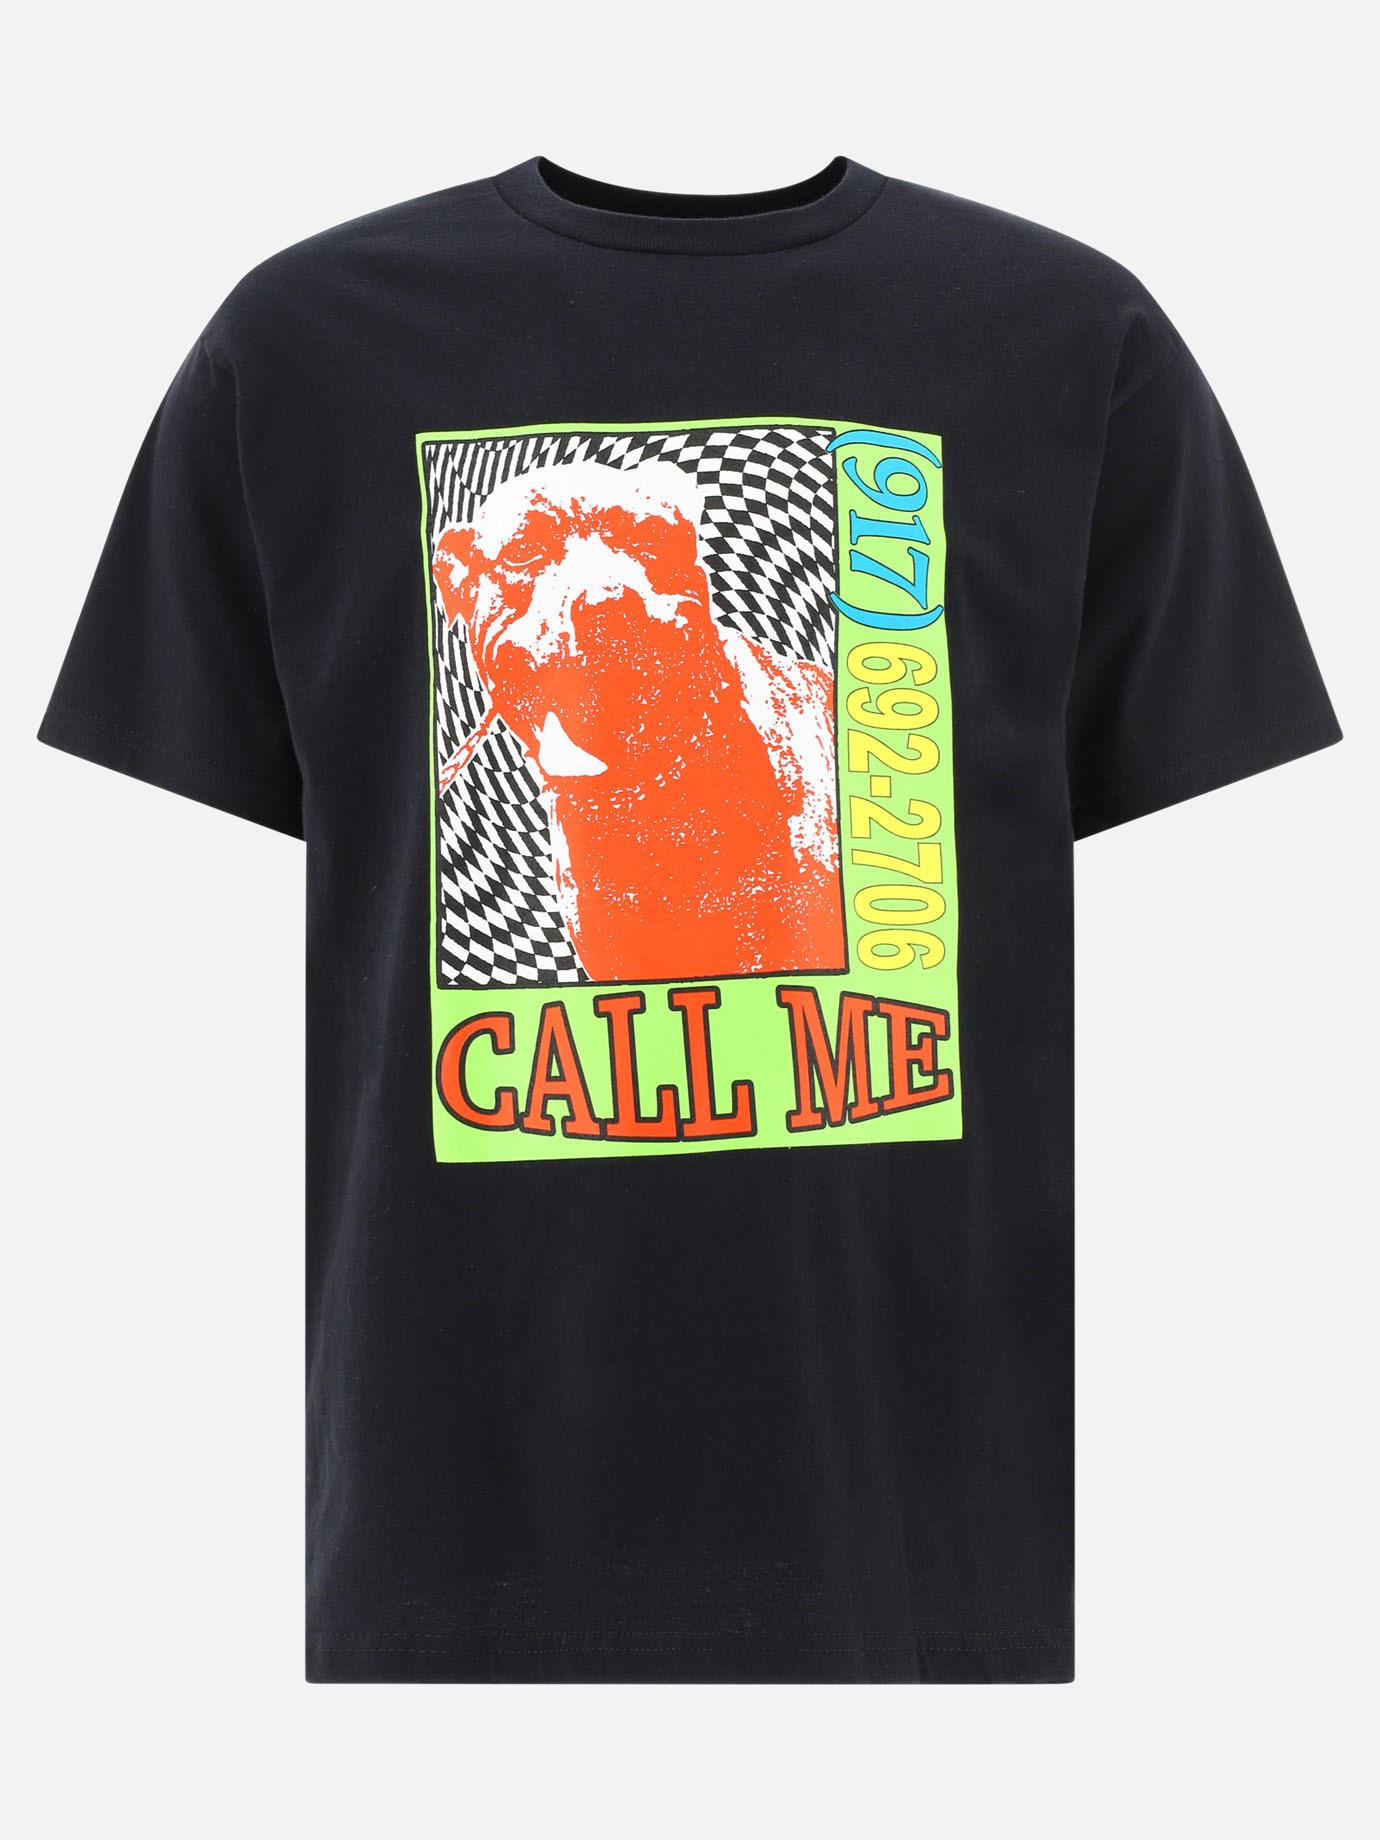  Wavy Dog  t-shirt by Call Me 917